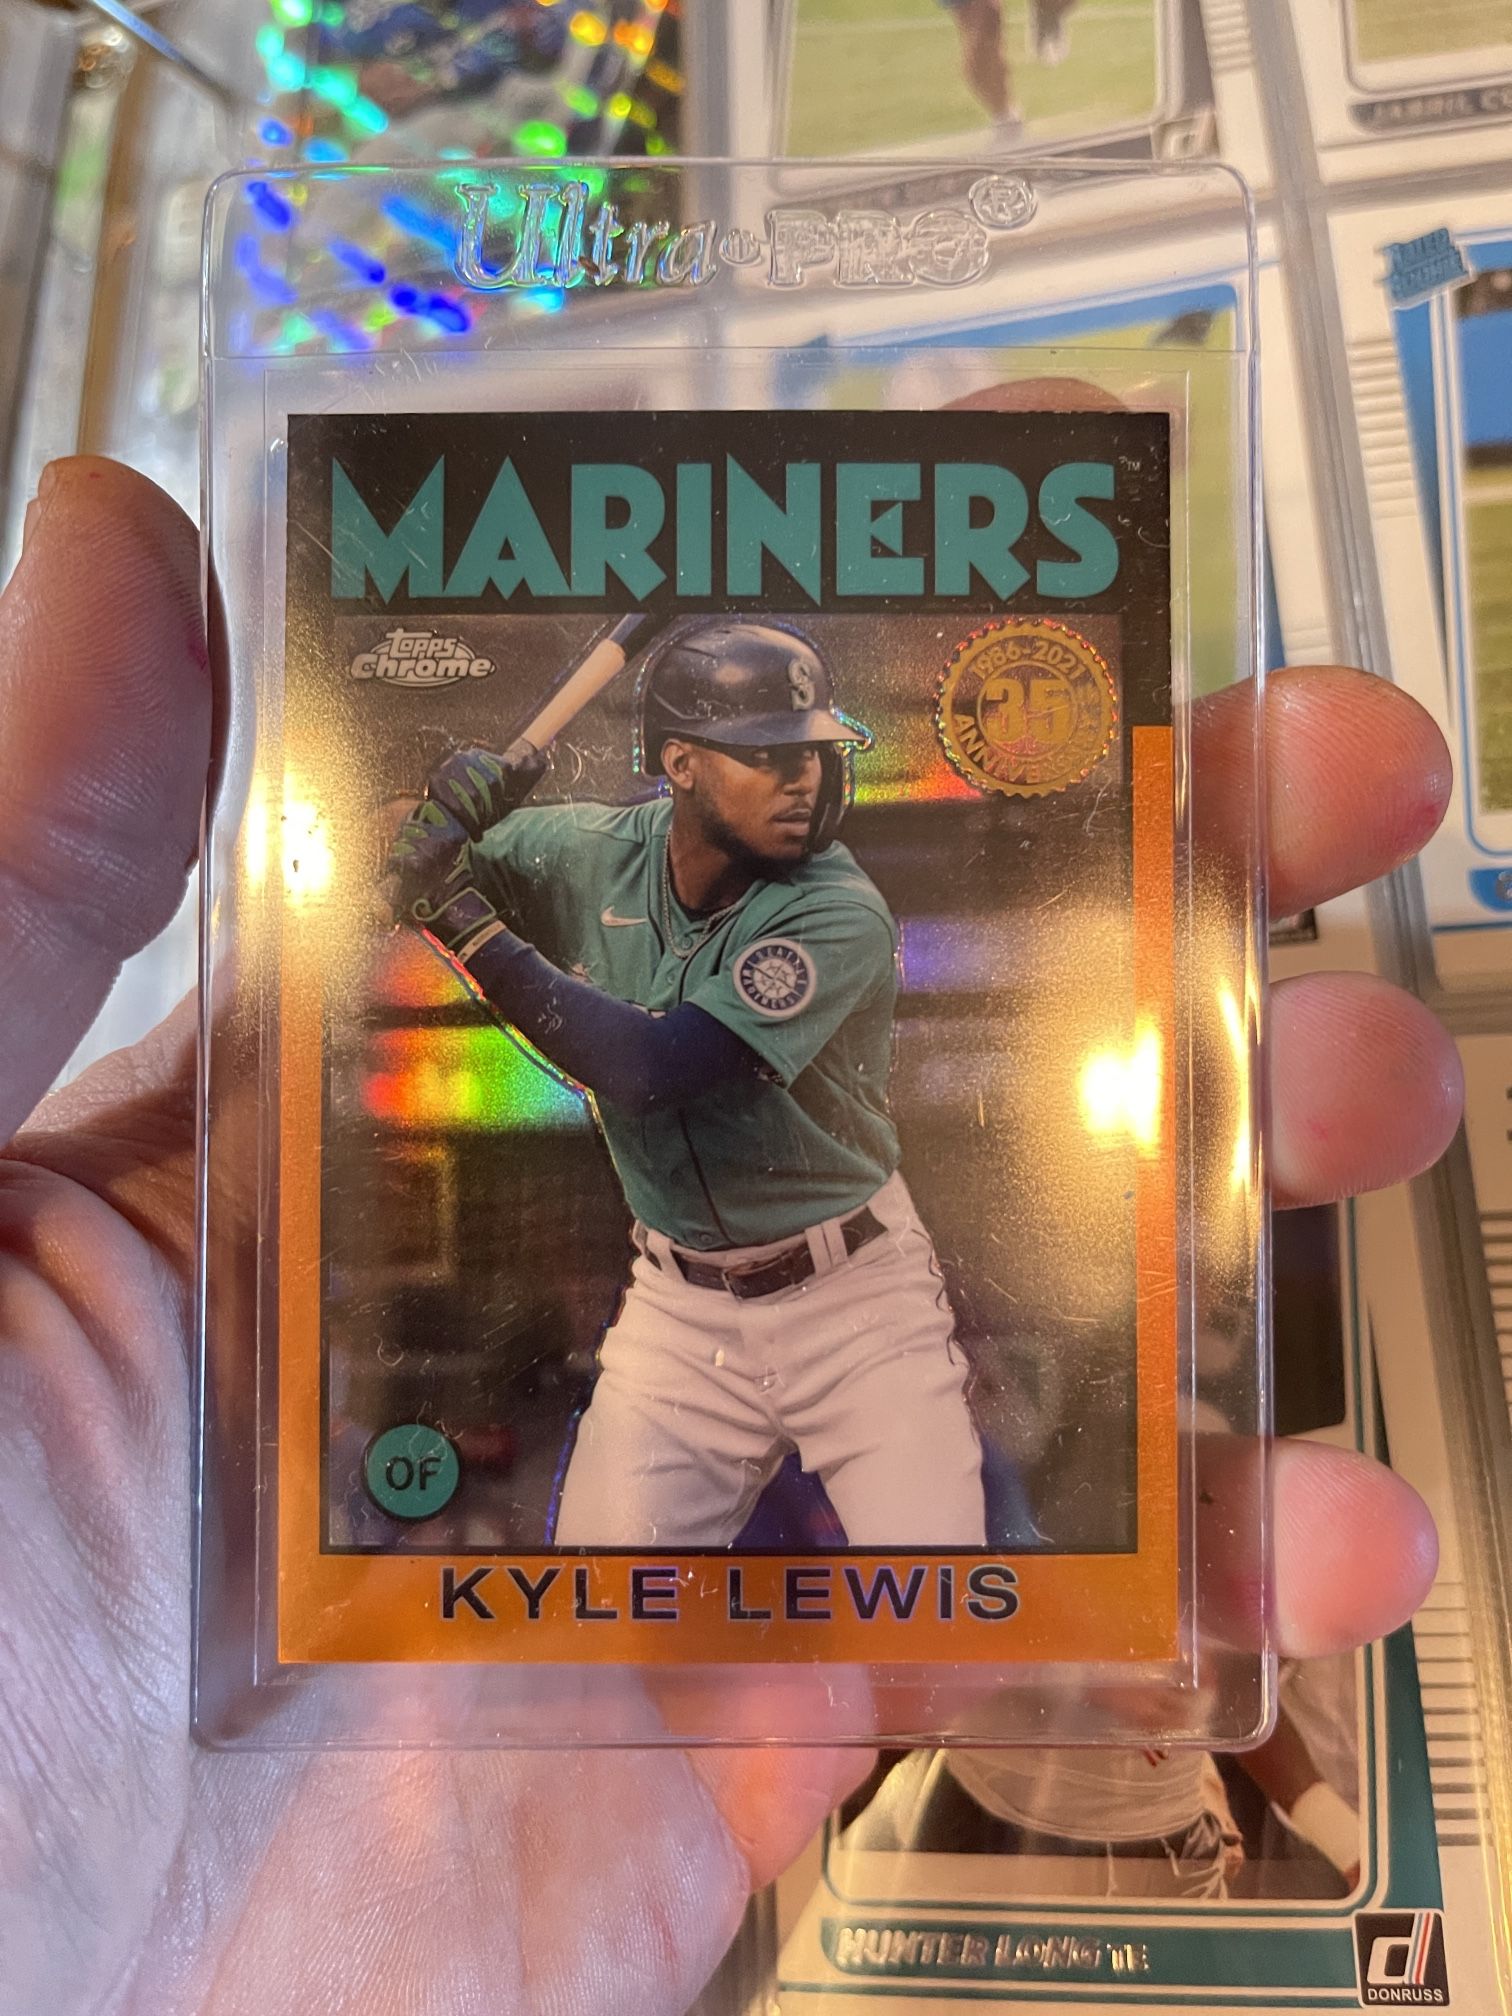 KYLE LEWIS 2021 TOPPS CHOME 35th ANNIVERSARY ORANGE REFRACTOR #/25